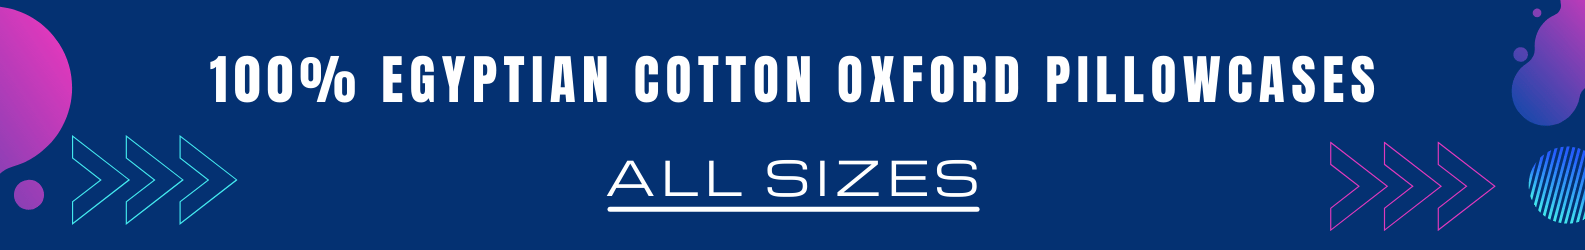 OXFORD PILLOW CASES